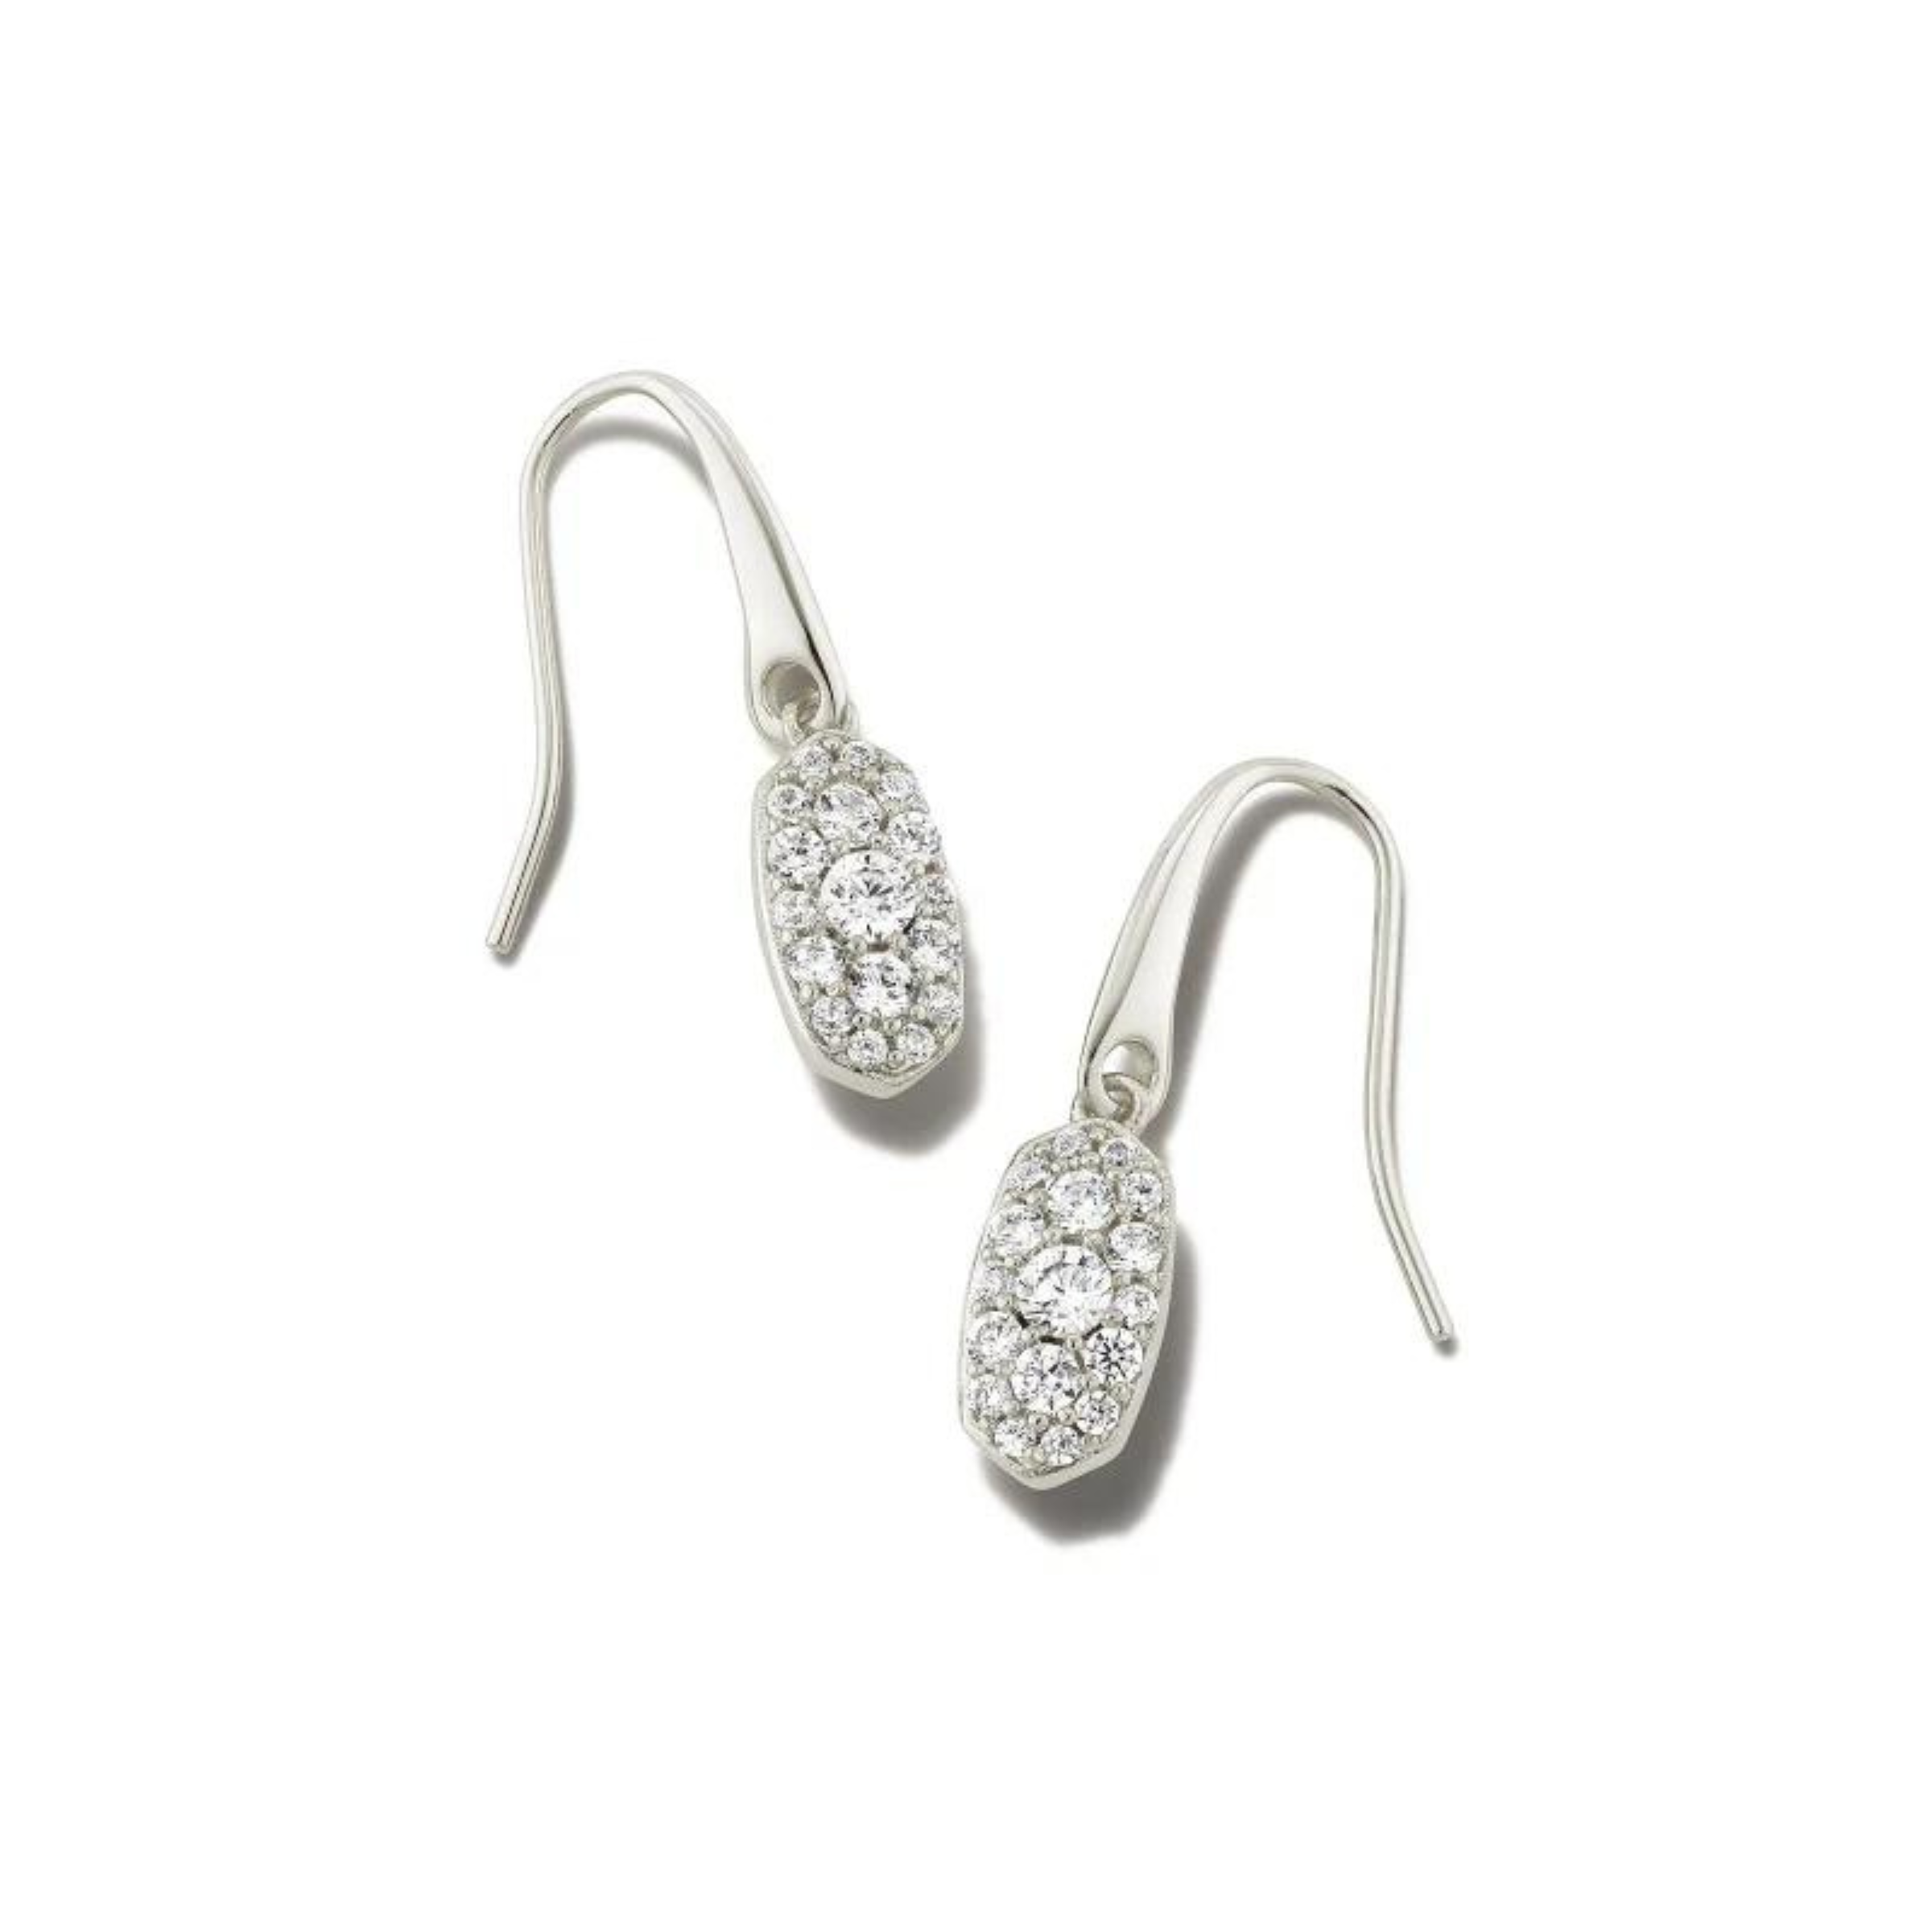 Silver, oval drop earrings with white crystals. These earrings are pictured on a white background. 